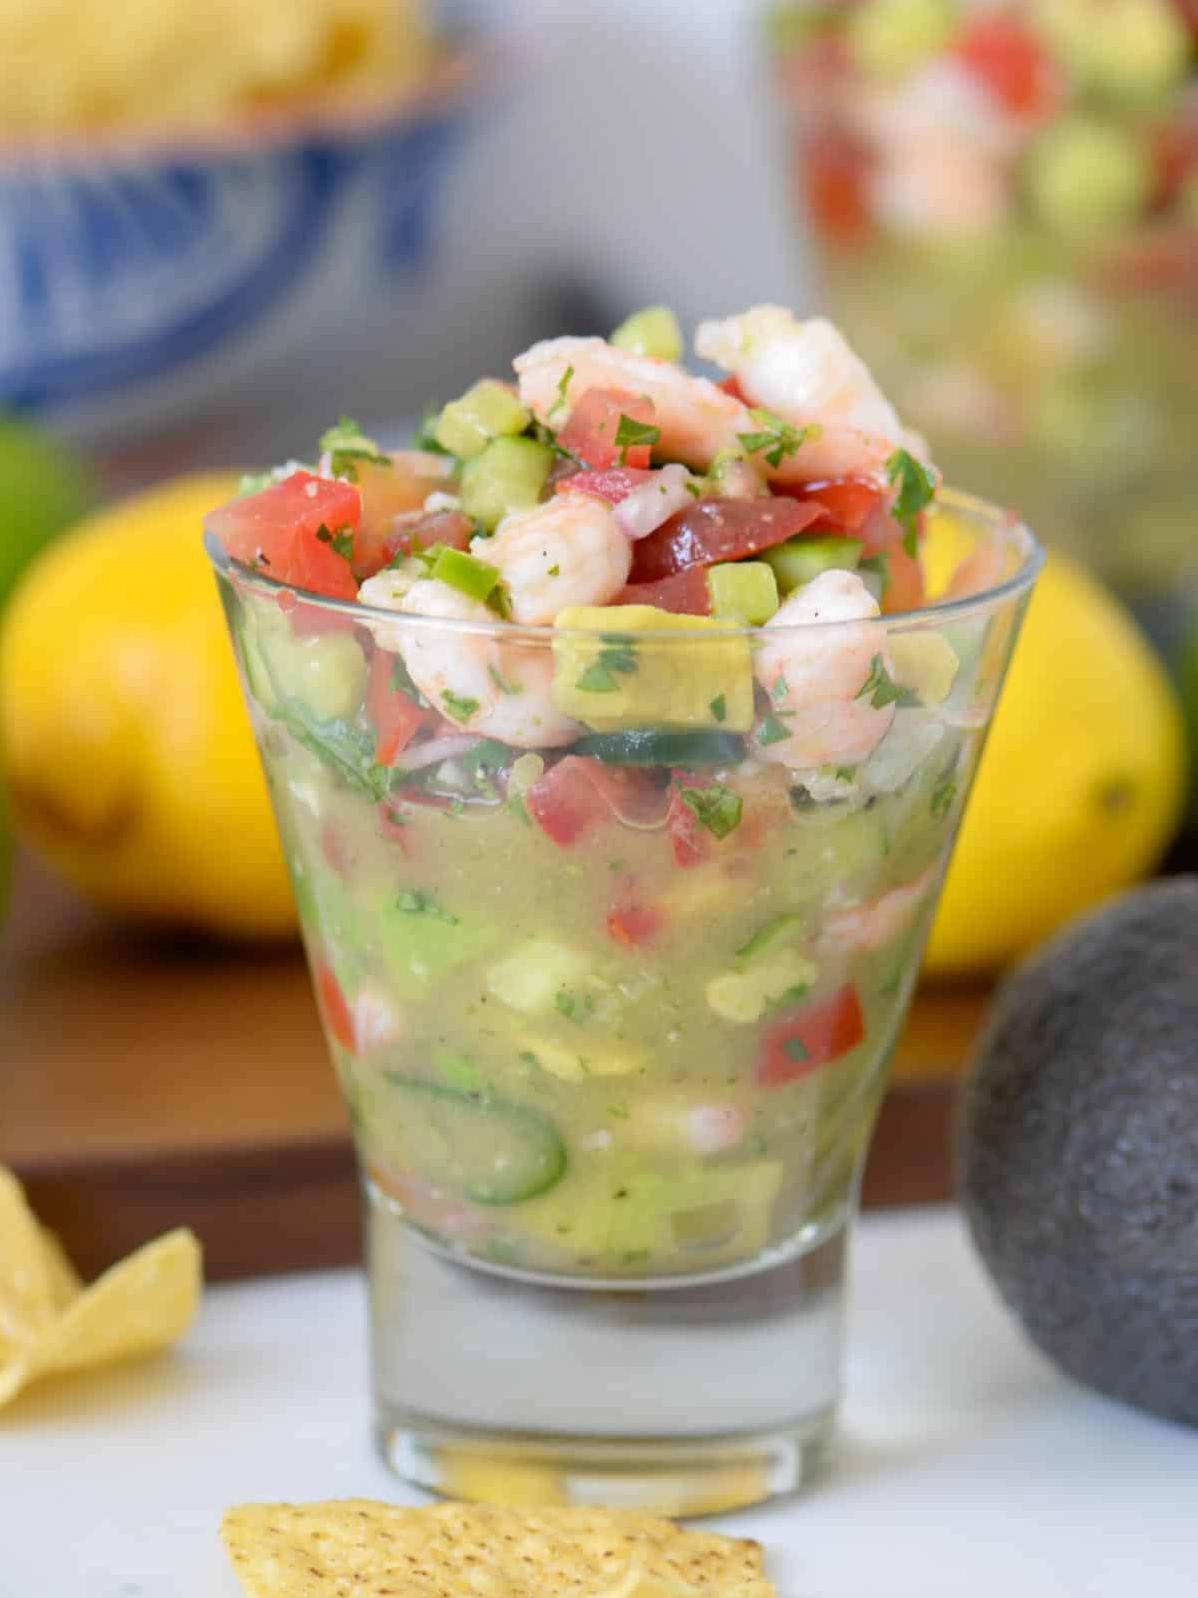  Our ceviche is a crowd-pleaser that will make your taste buds dance.